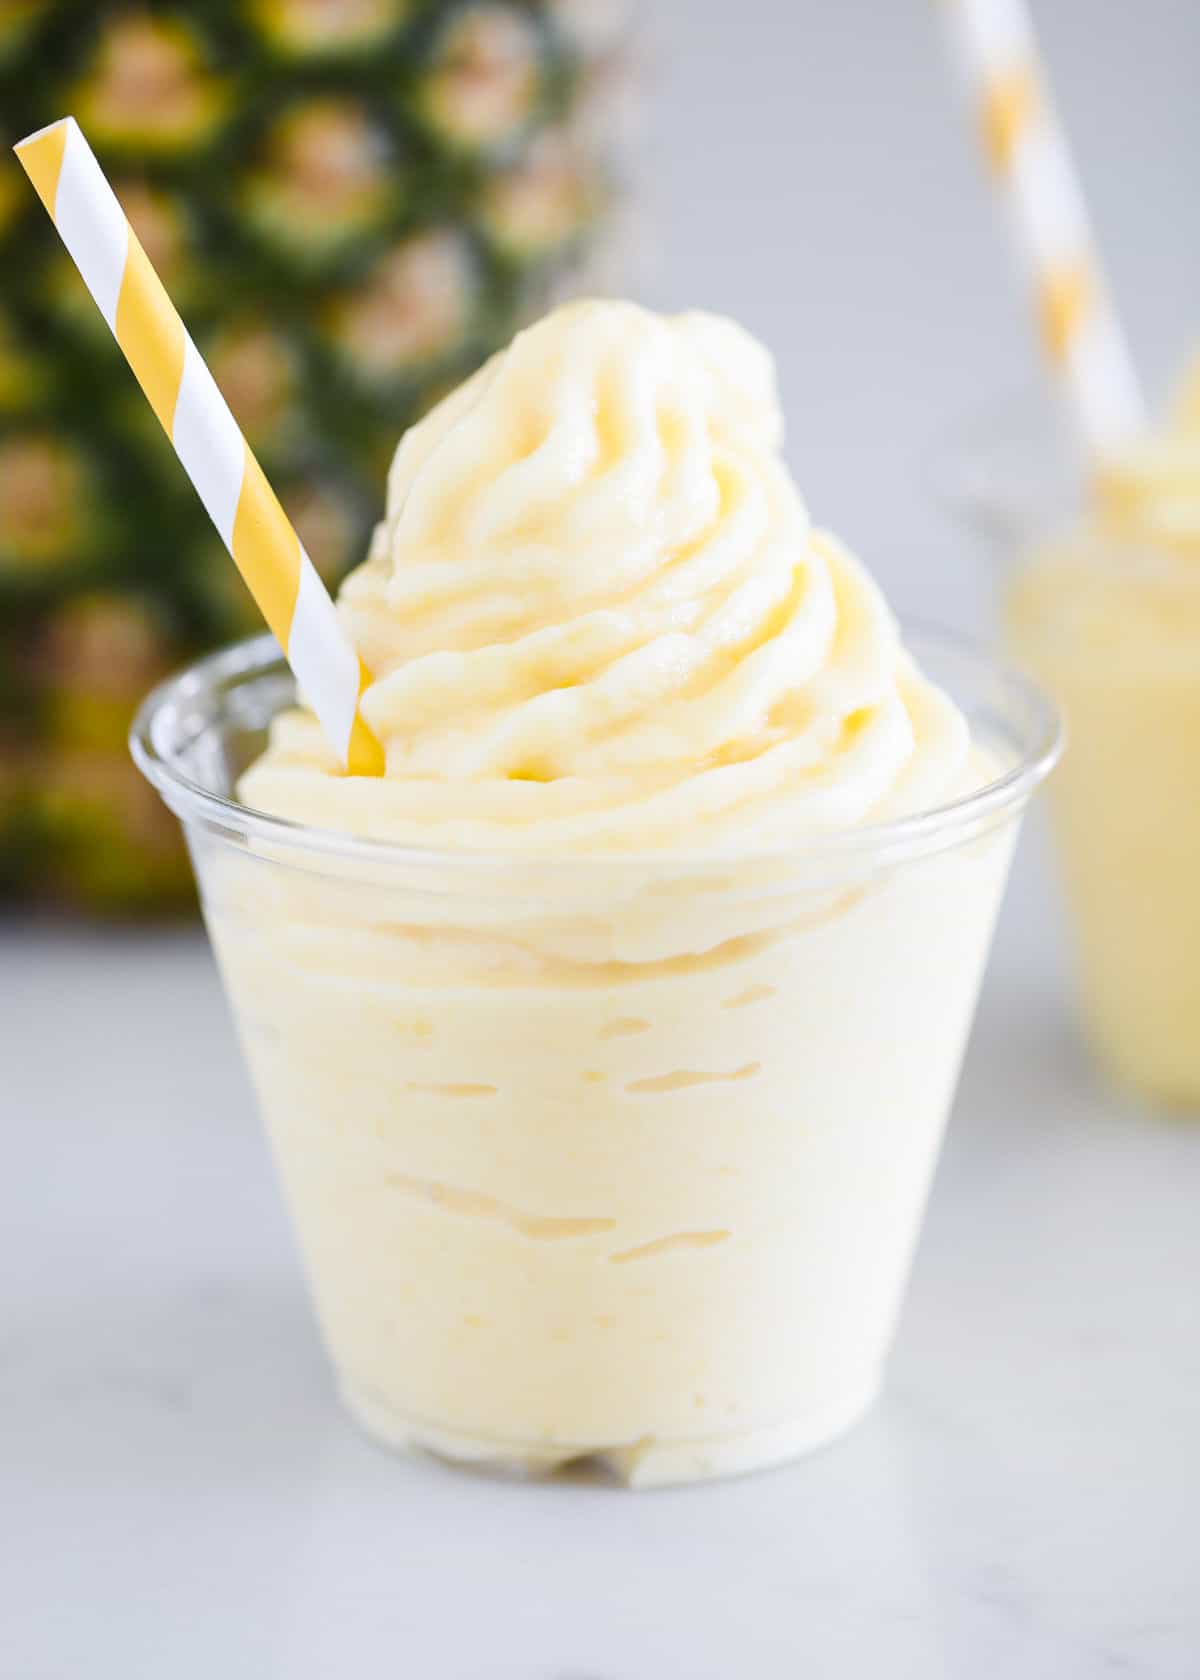 Dole whip in plastic cup.